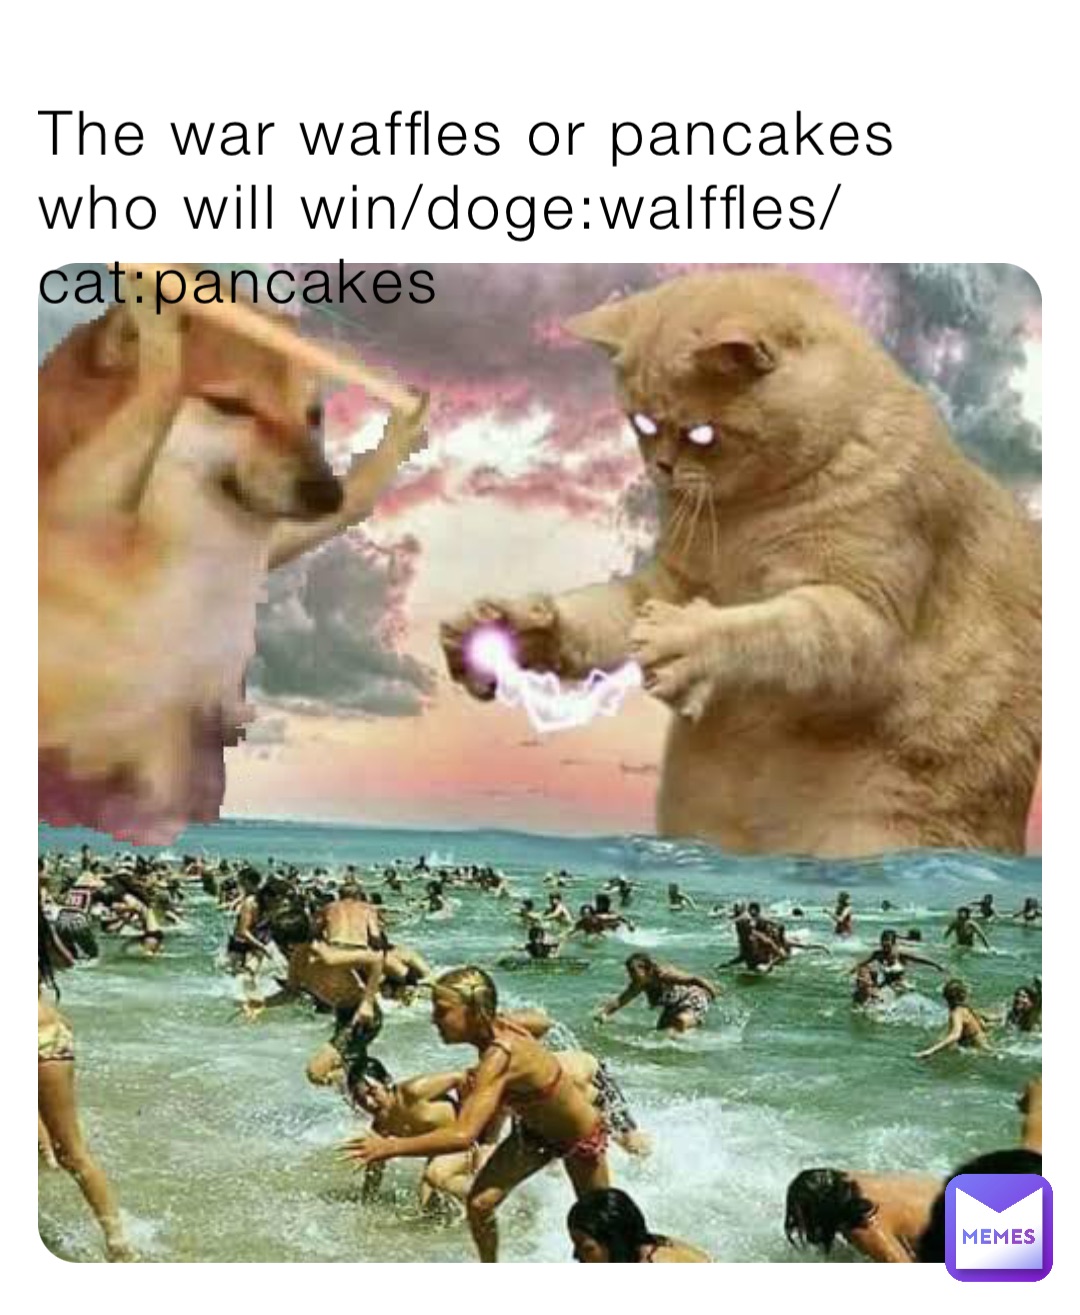 The war waffles or pancakes who will win/doge:walffles/cat:pancakes